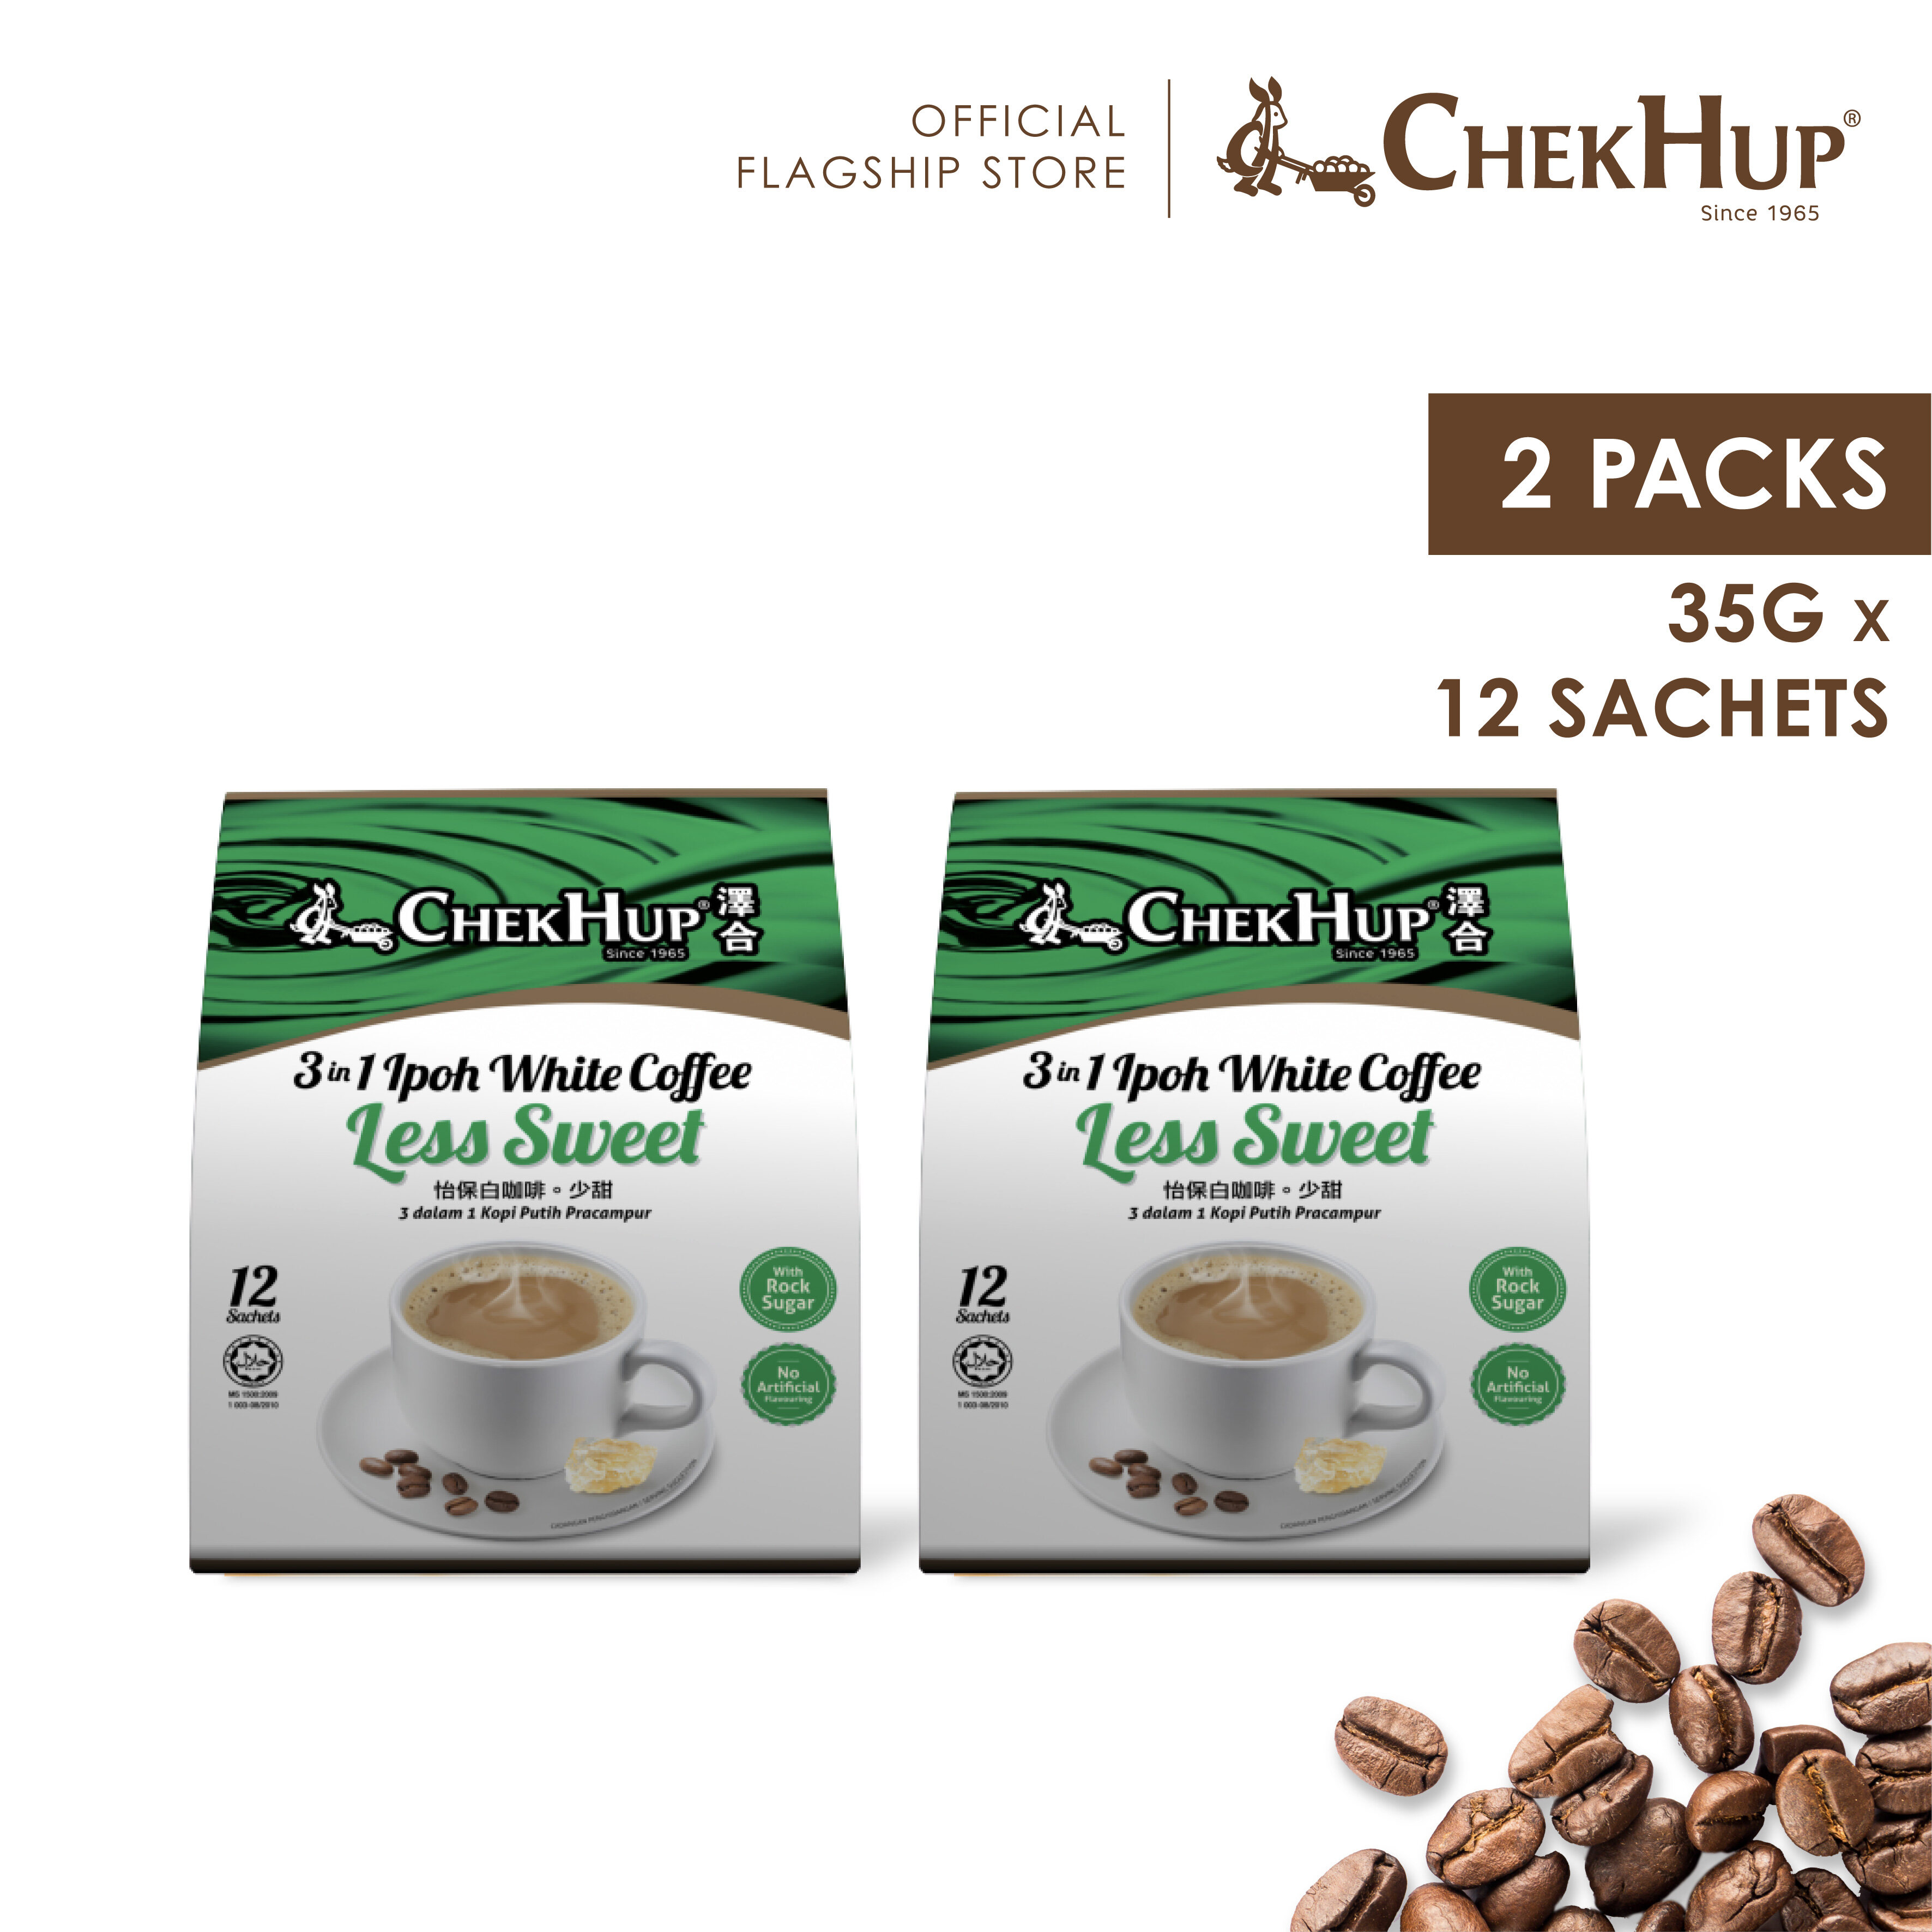 Chek Hup 3 in 1 Ipoh White Coffee Less Sweet 35g x 12s [Bundle of 2]